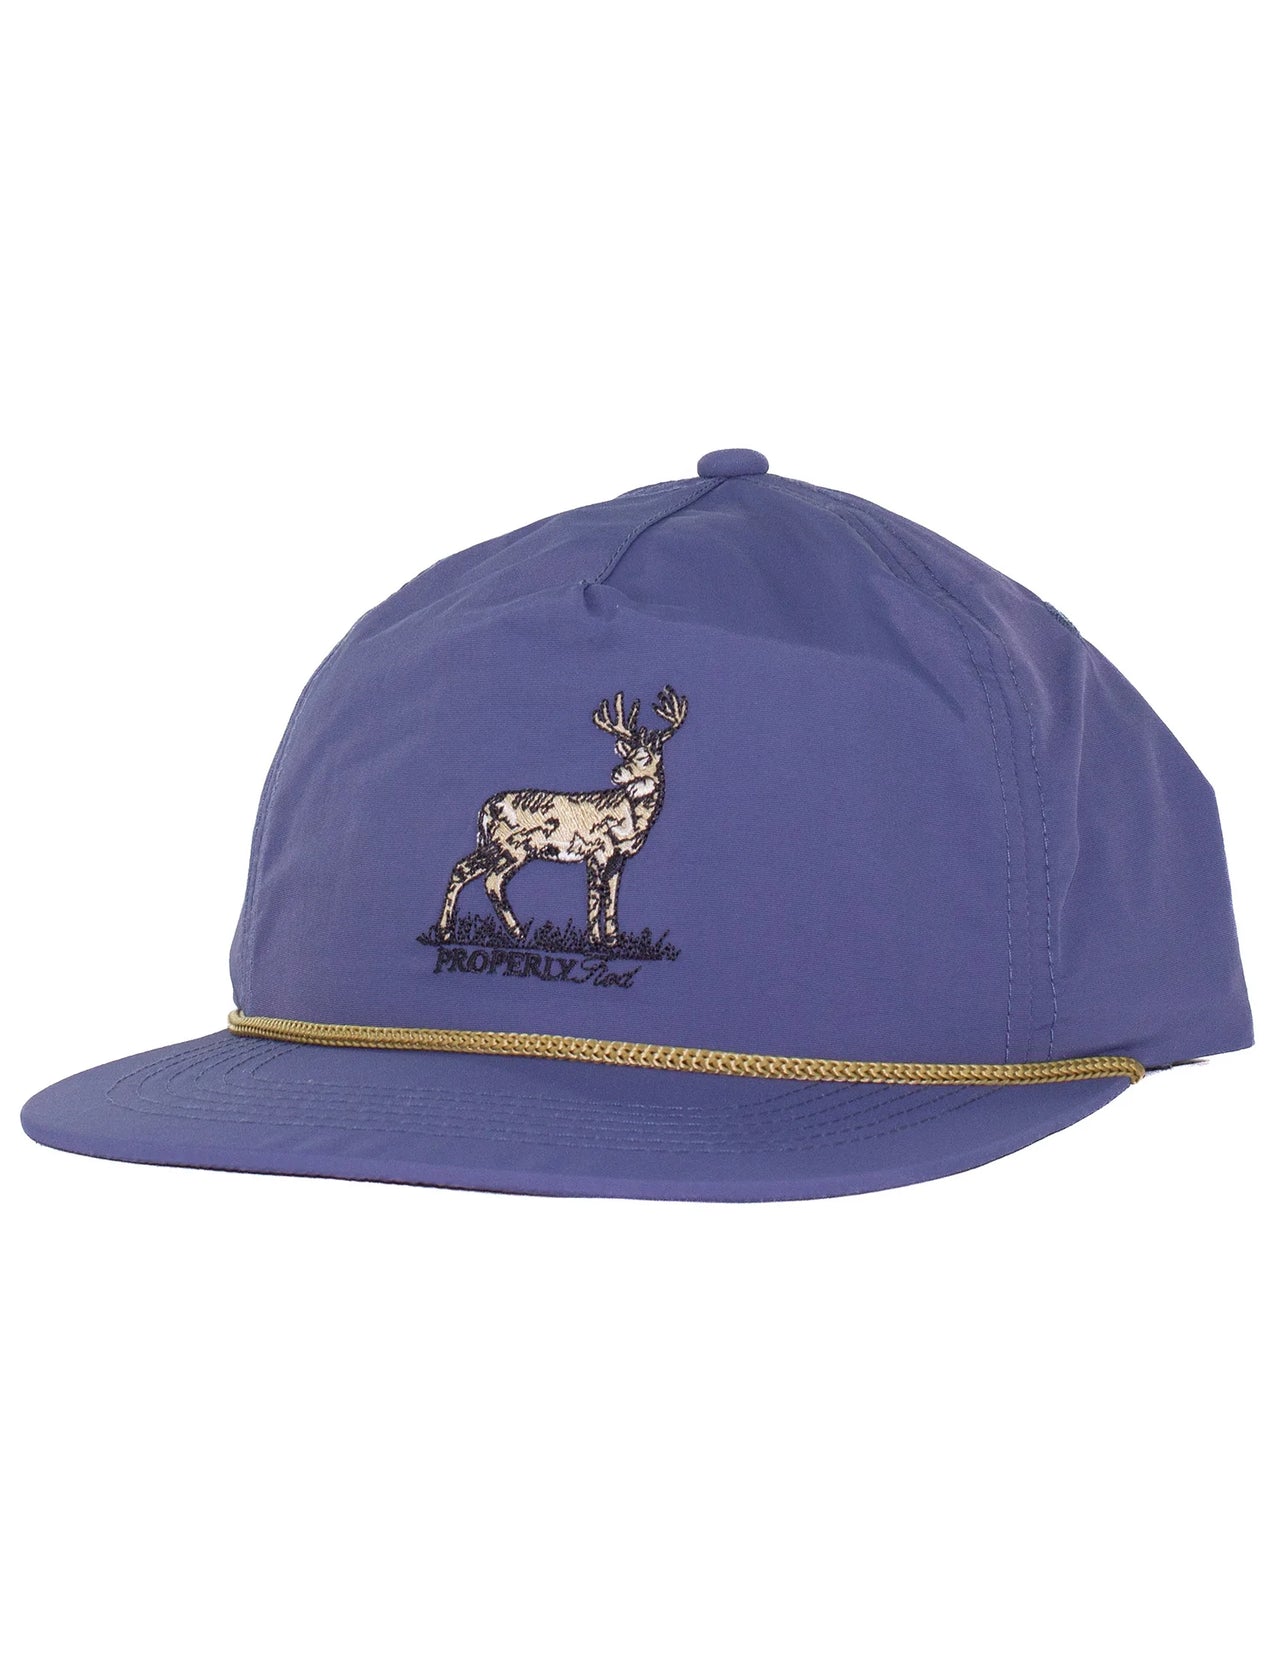 Youth - Boys Whitetail Navy Rope Cap